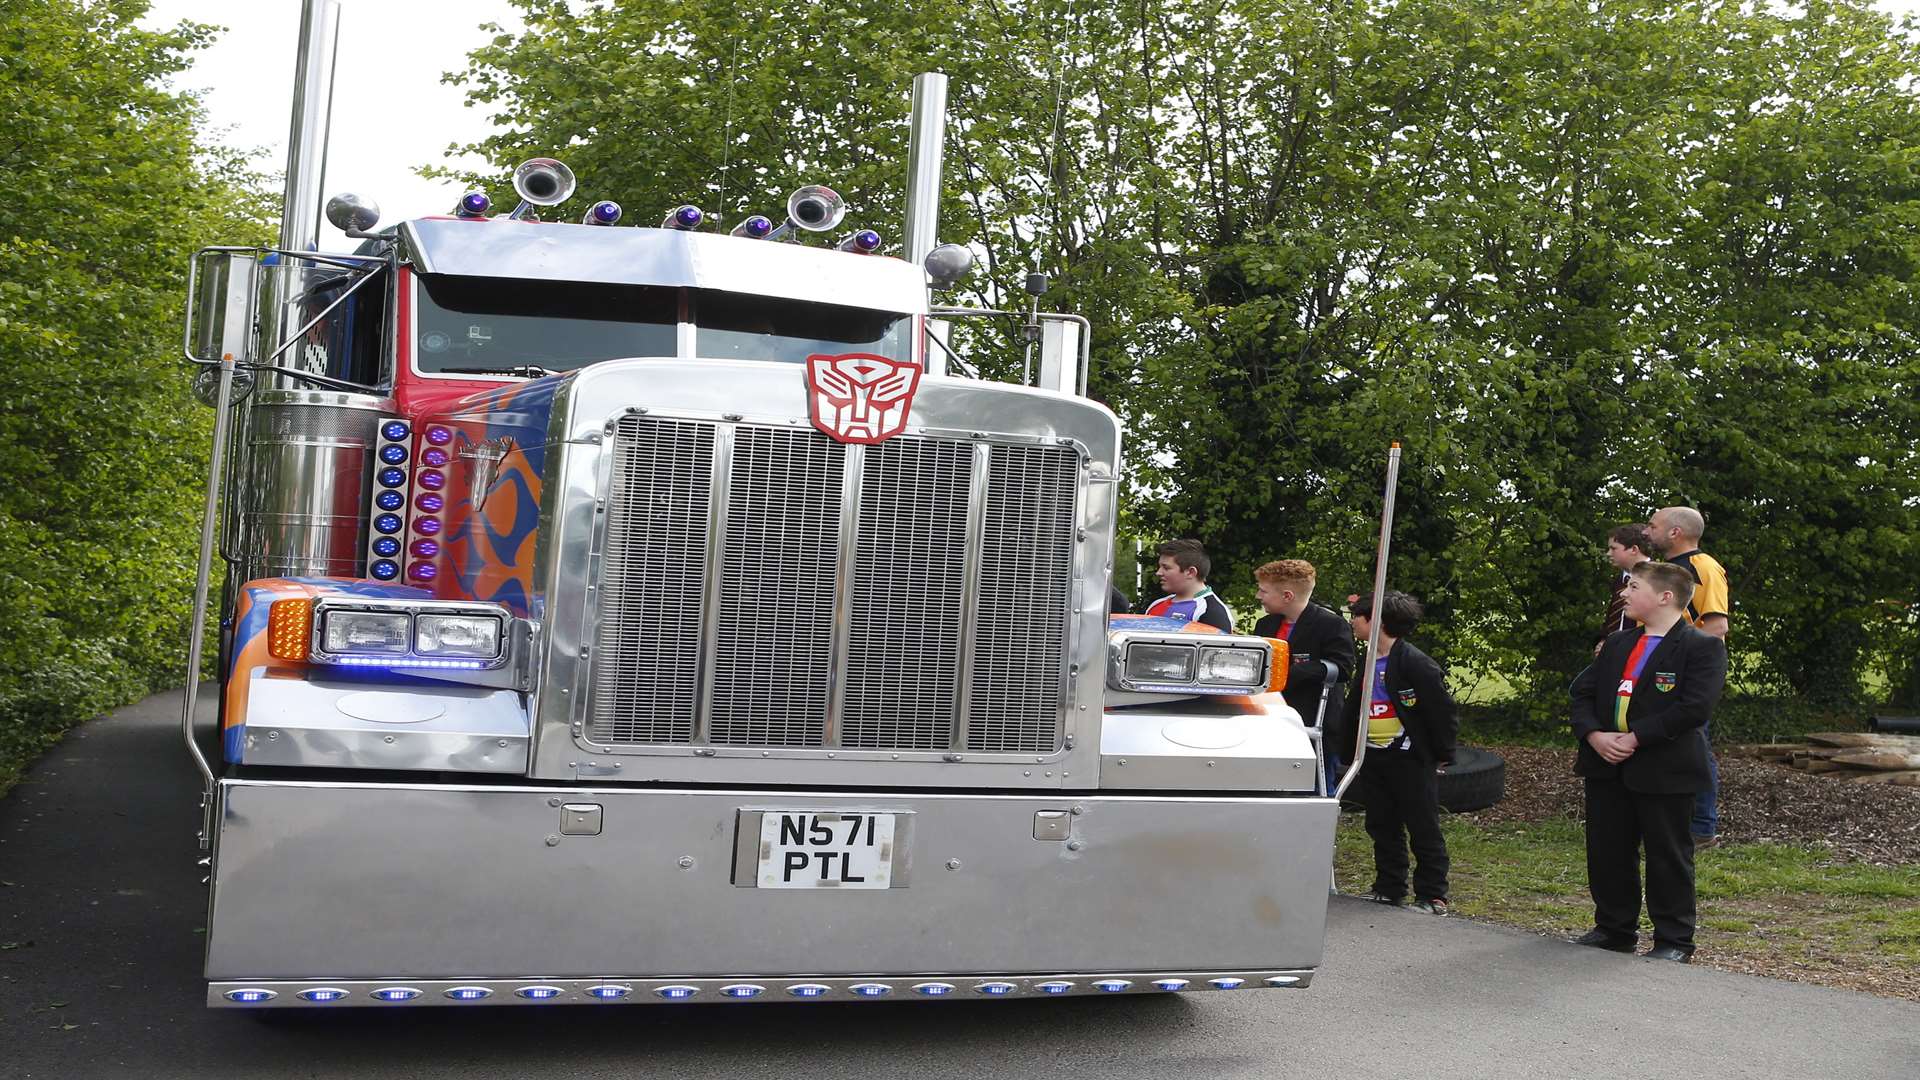 The Optimus Prime hearse carried Troy Philpott to his final resting place